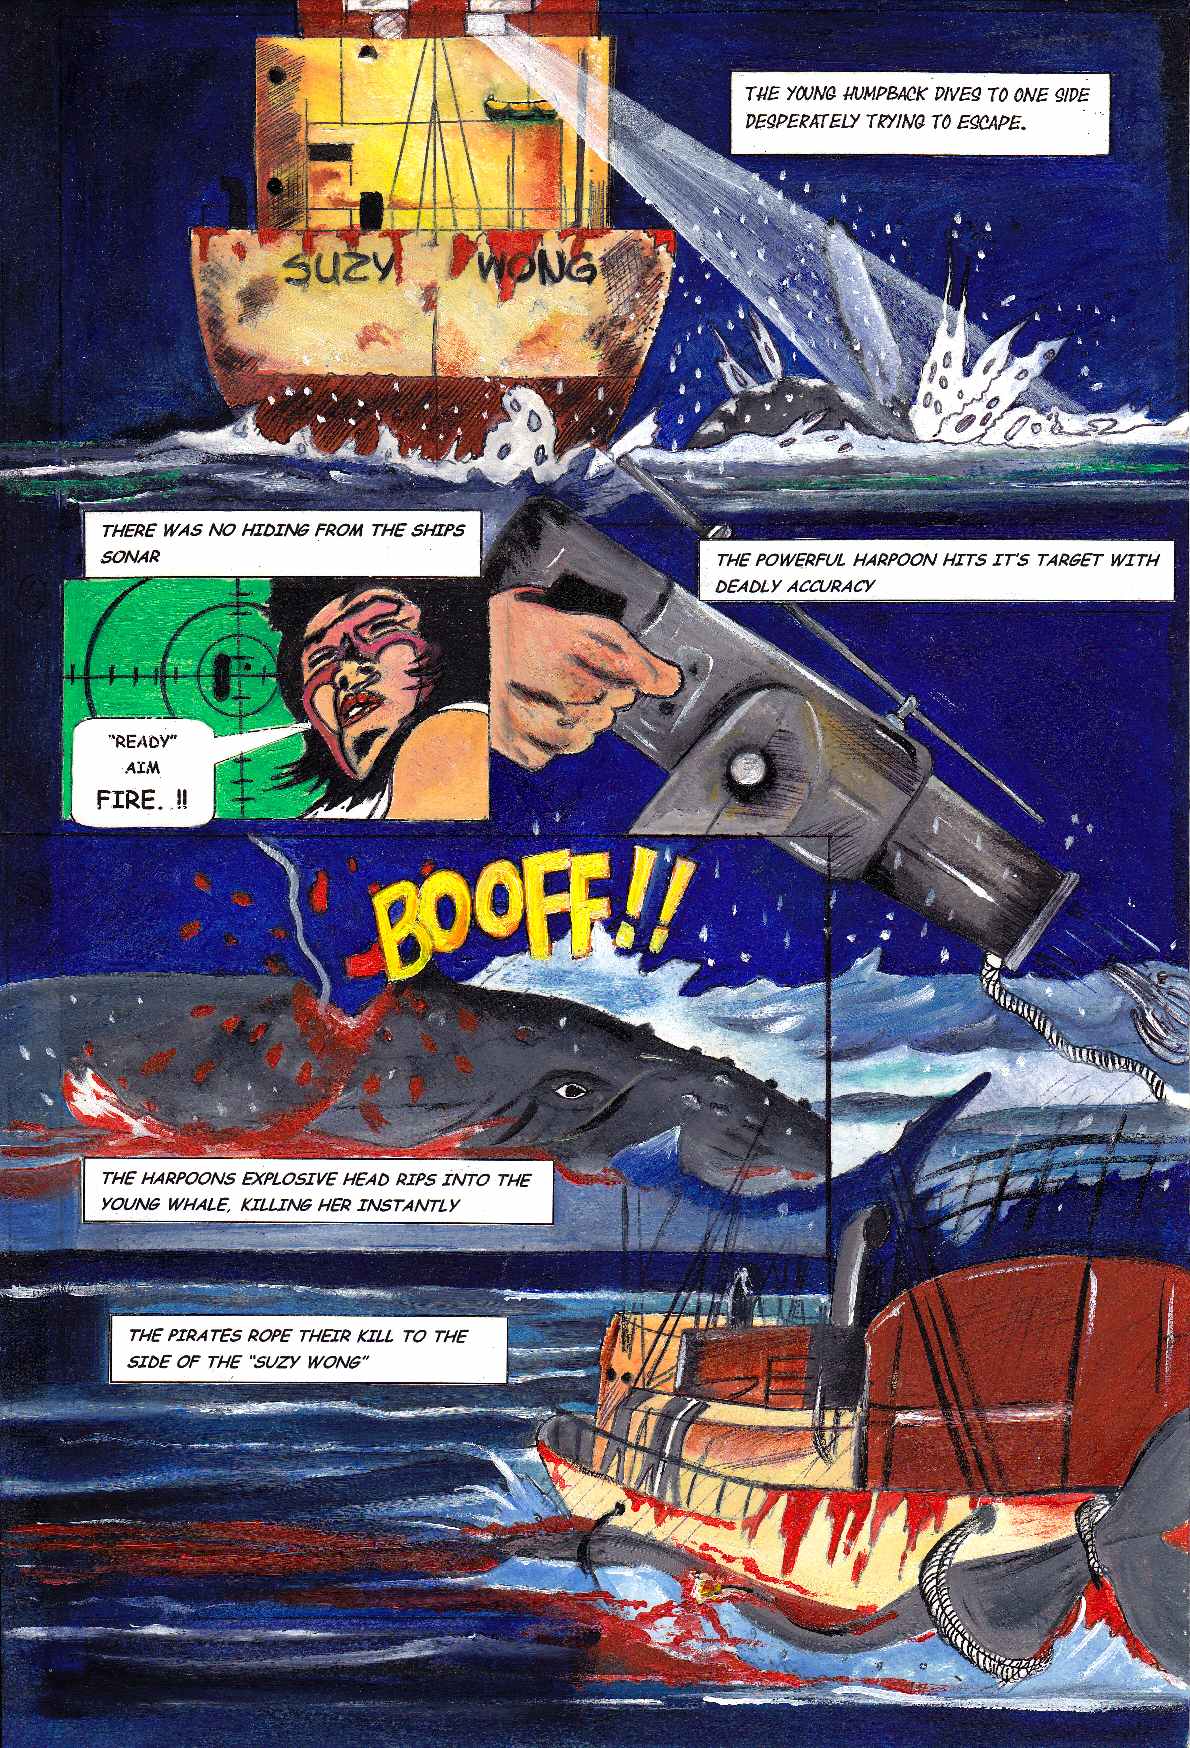 The Suzy Wong, Japanese whaling ship closes in on Kana, a female humpback whale, killing her with an explosive harpoon